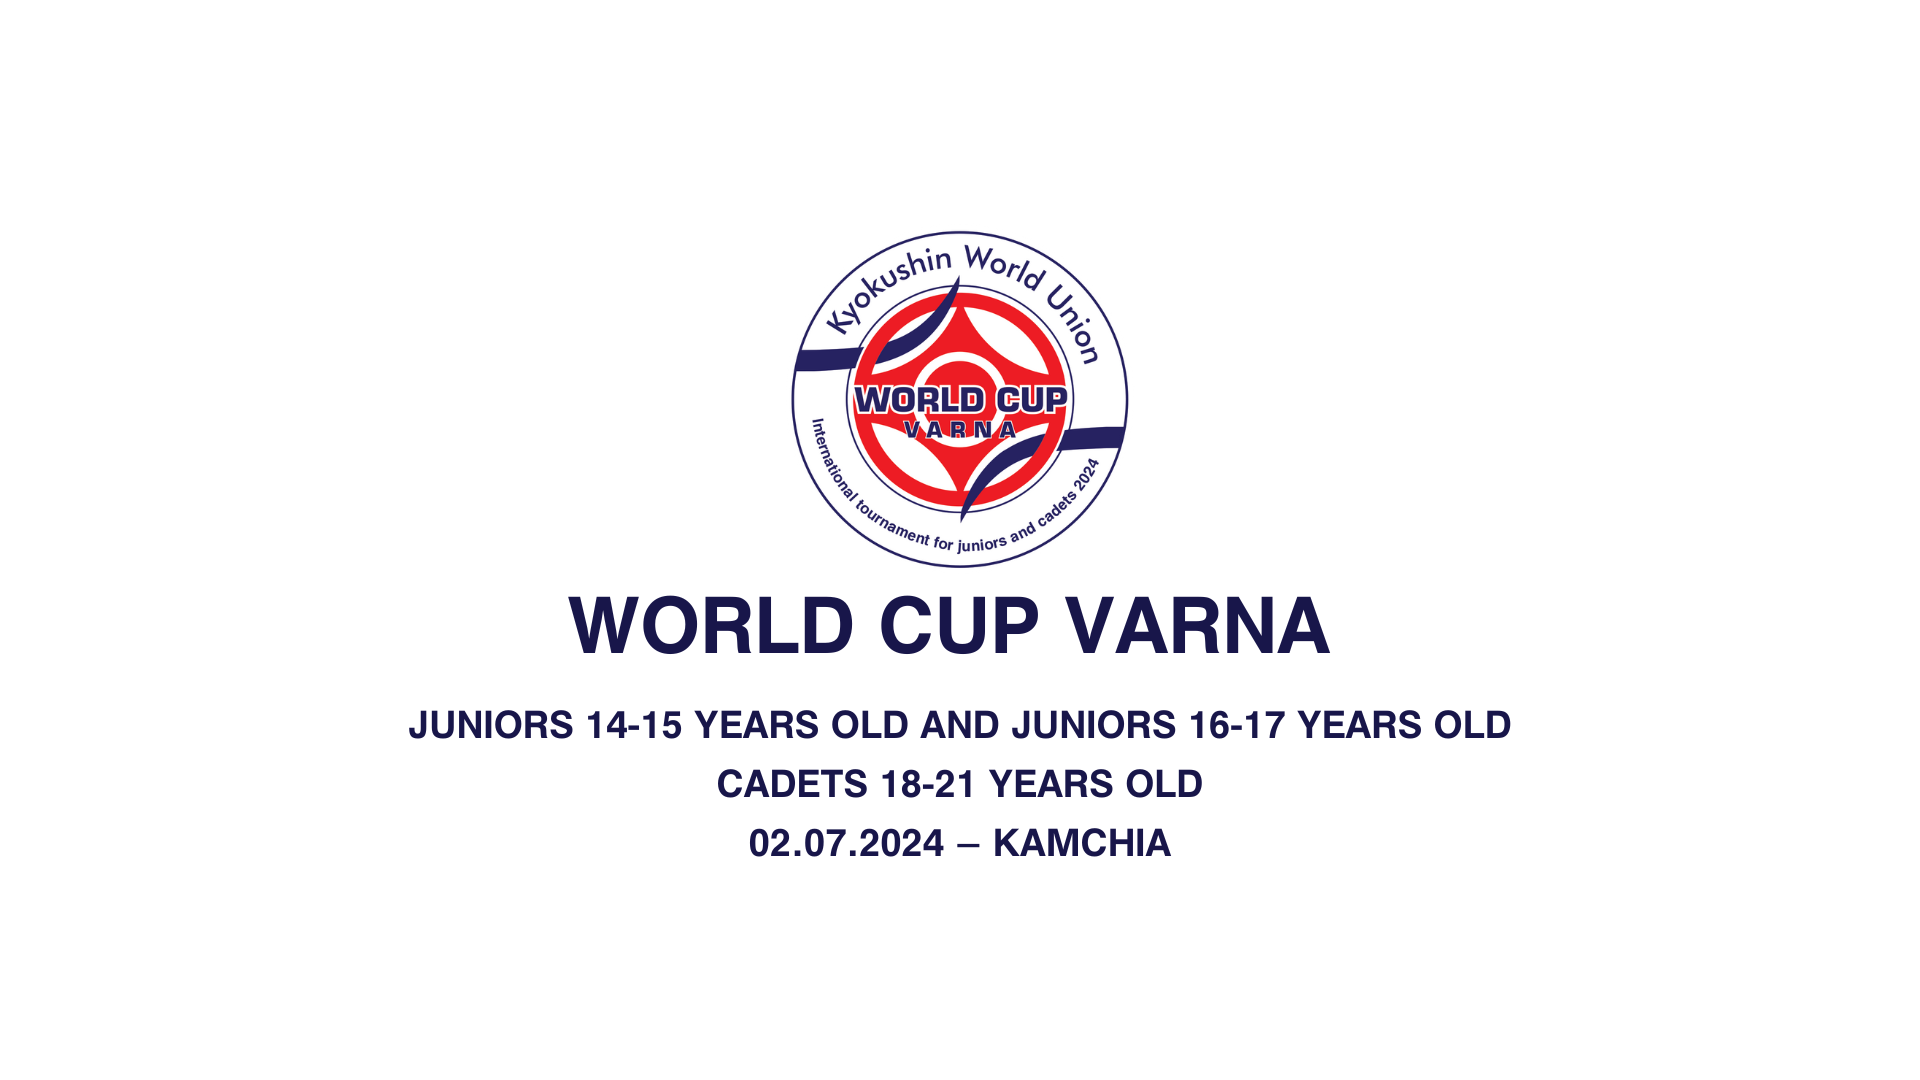 World Cup Varna for juniors and cadets 